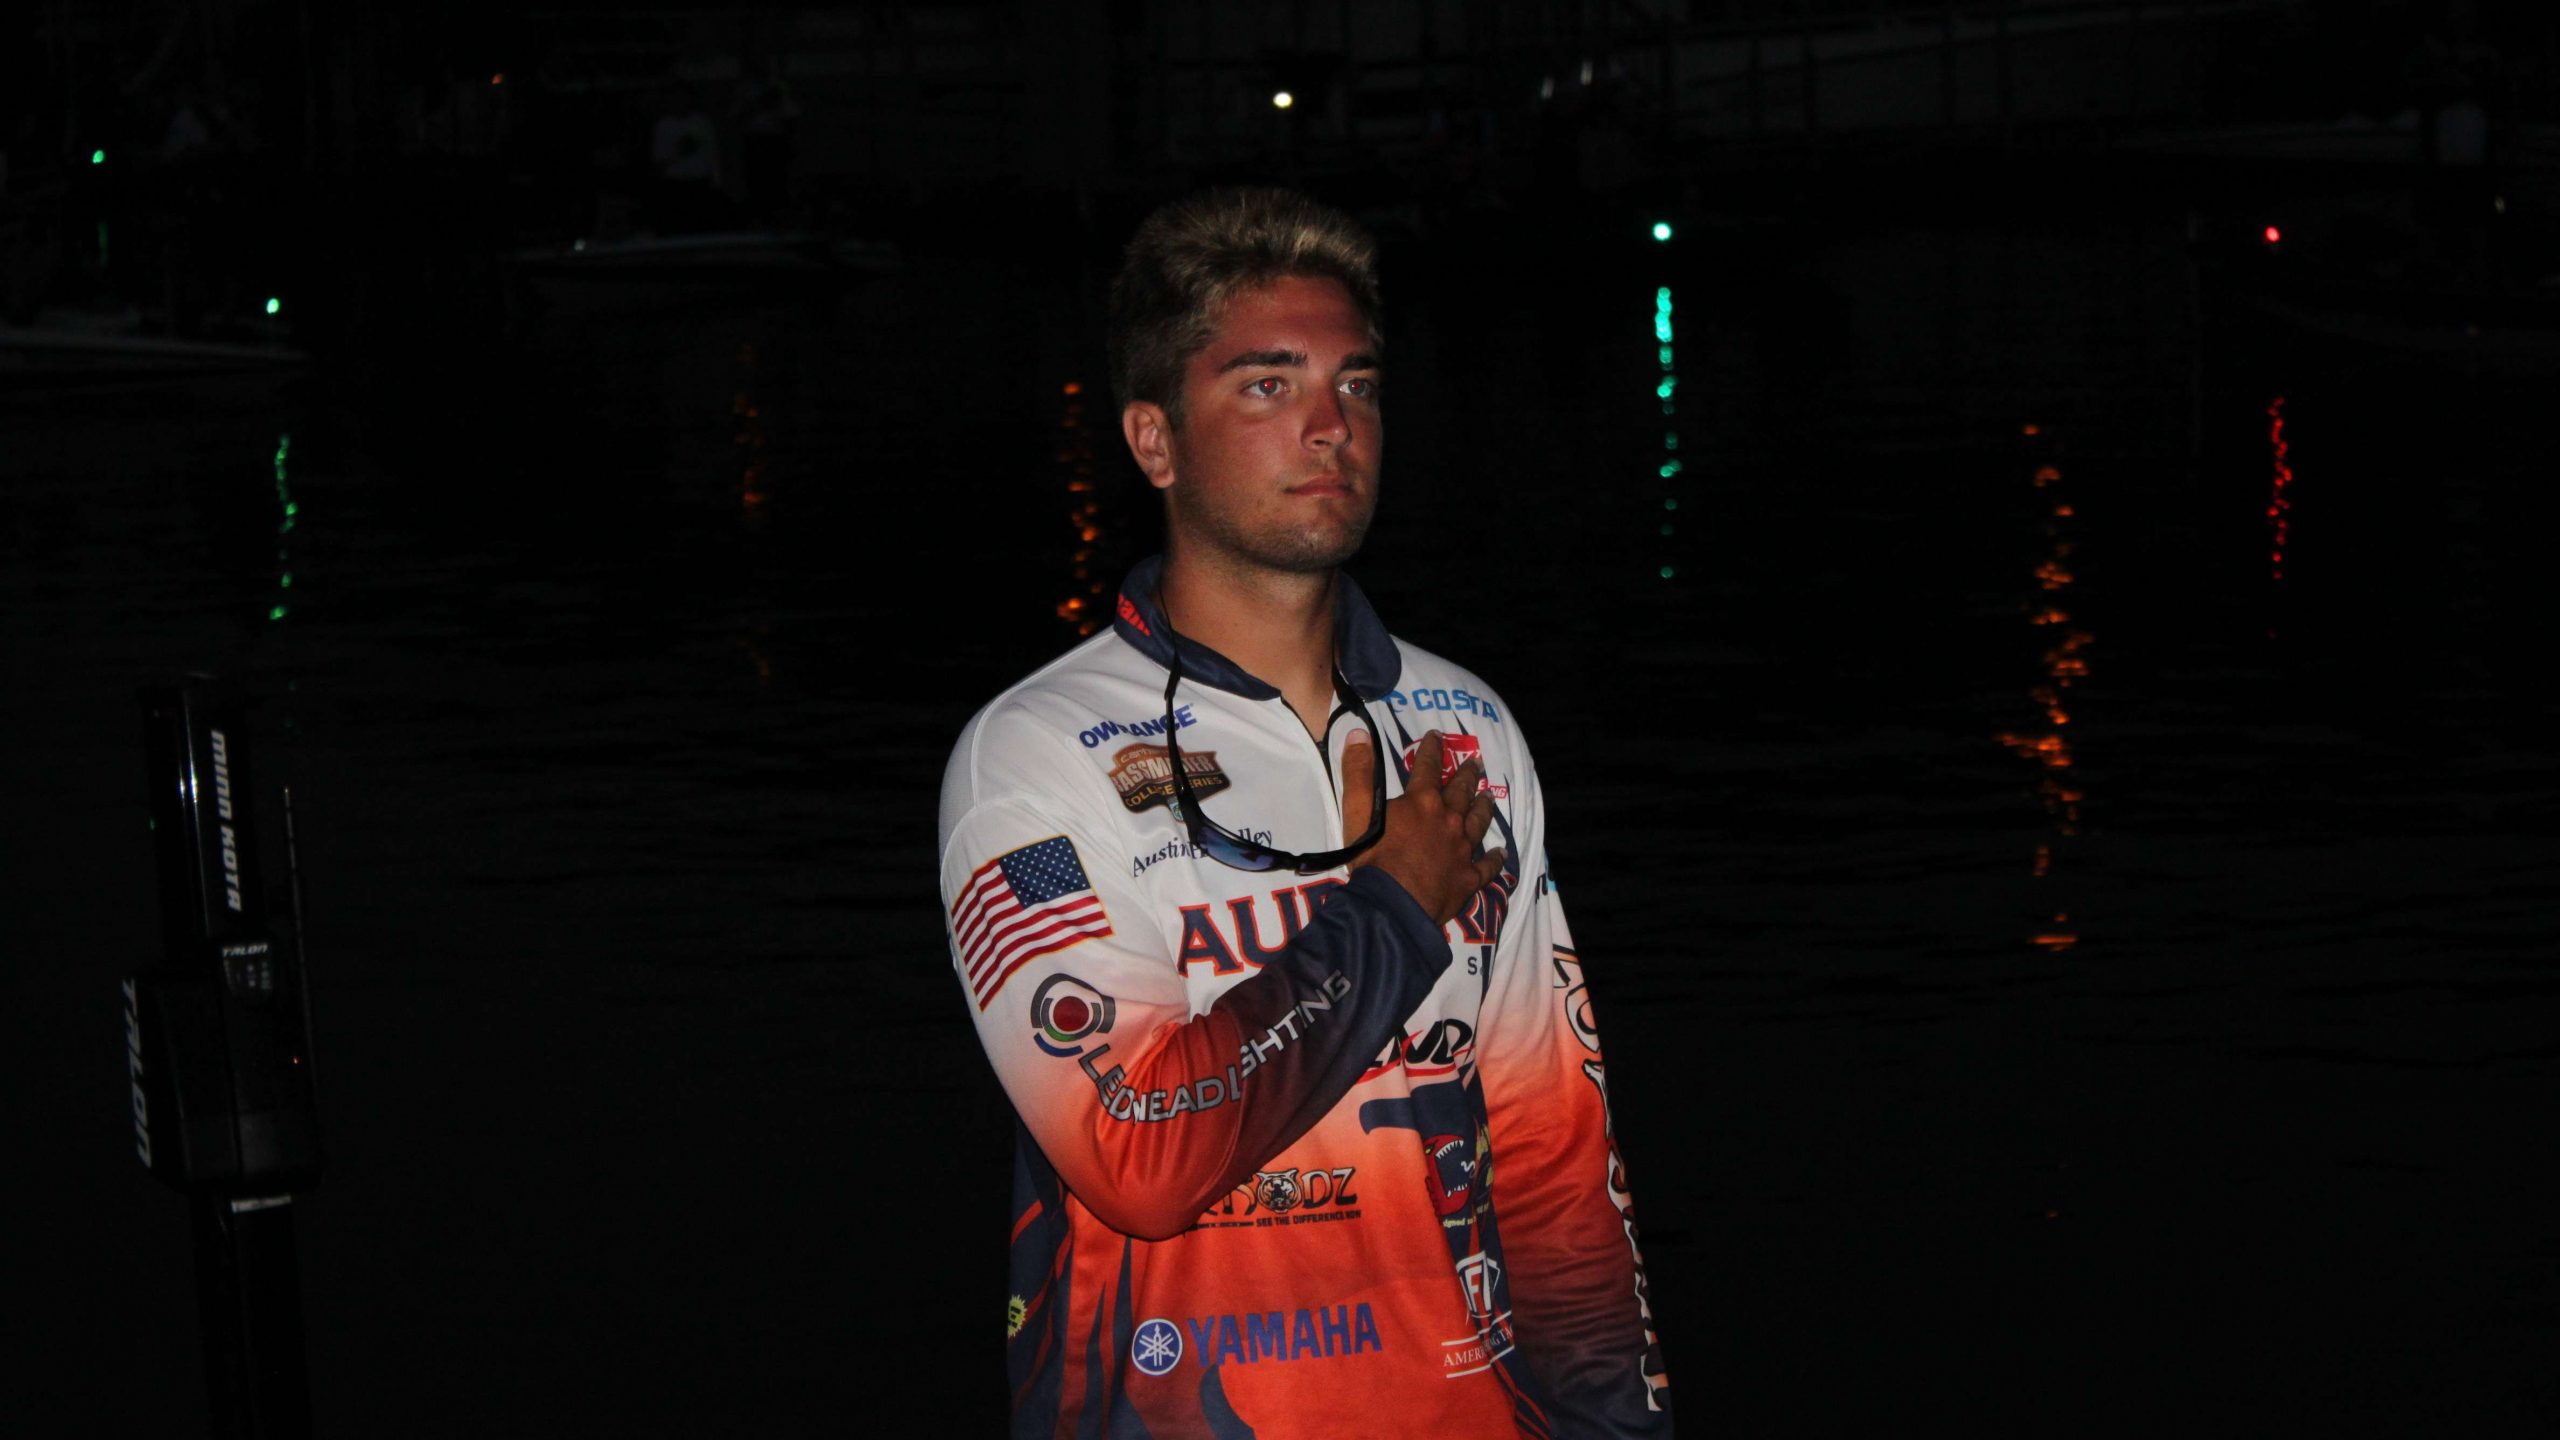 Auburn's Austin Handley is the 7th seed. Here is he listening intently to the National Anthem.